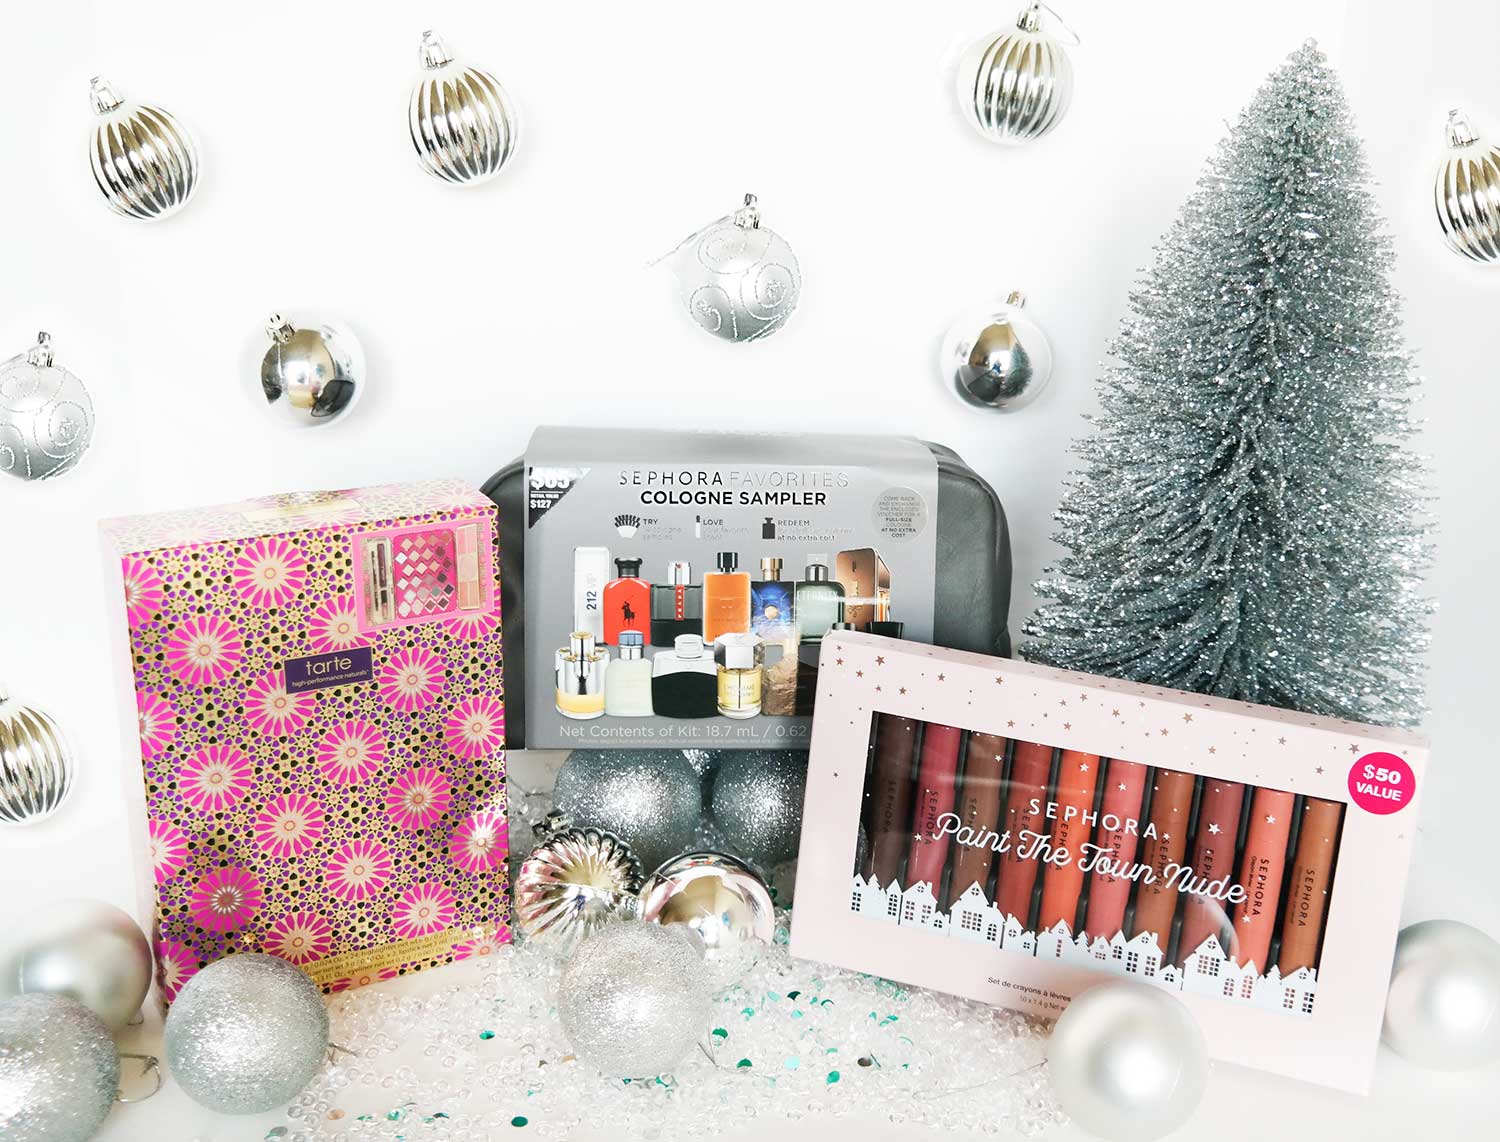 Sephora Holiday 2018: Best Beauty Gift Sets Under $50 | Sephora gift sets,  Sephora holiday, Makeup products sephora